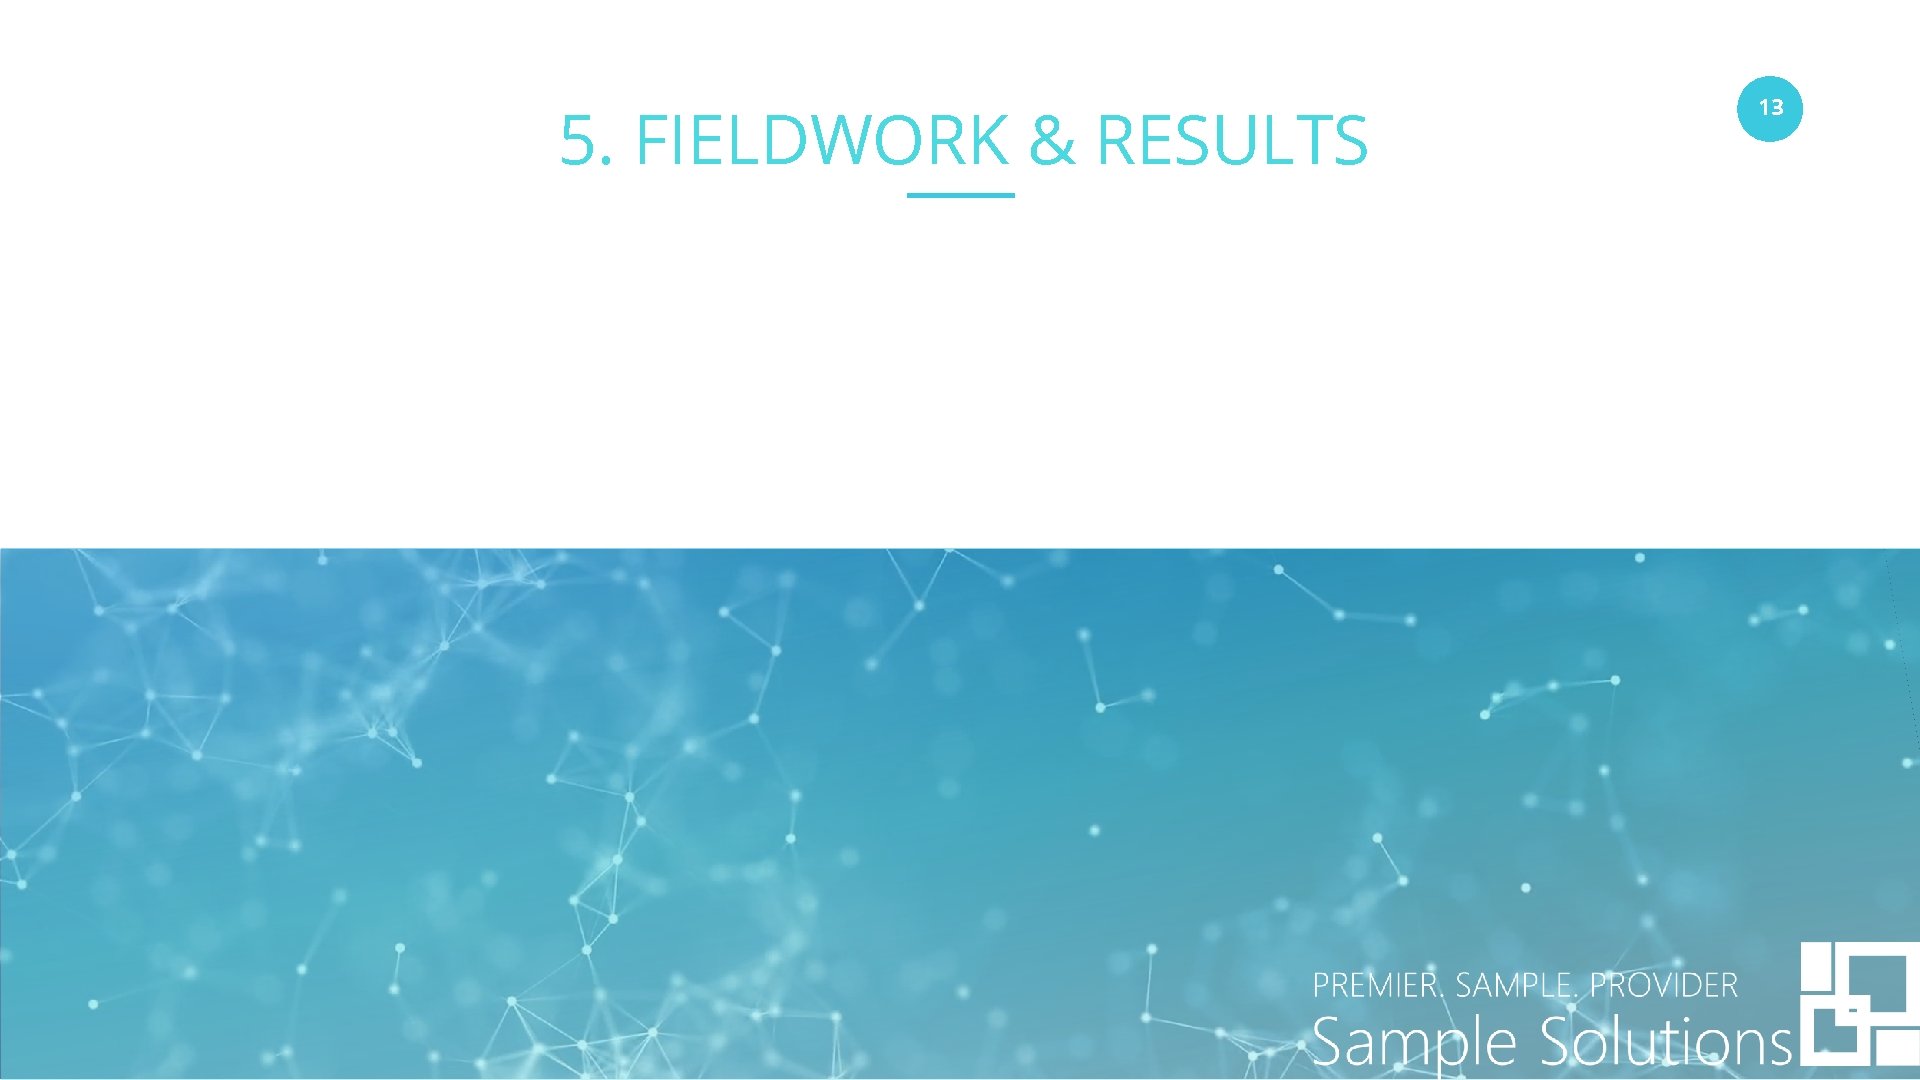 5. FIELDWORK & RESULTS www. companyname. com © 2016 Startup theme. All Rights Reserved.